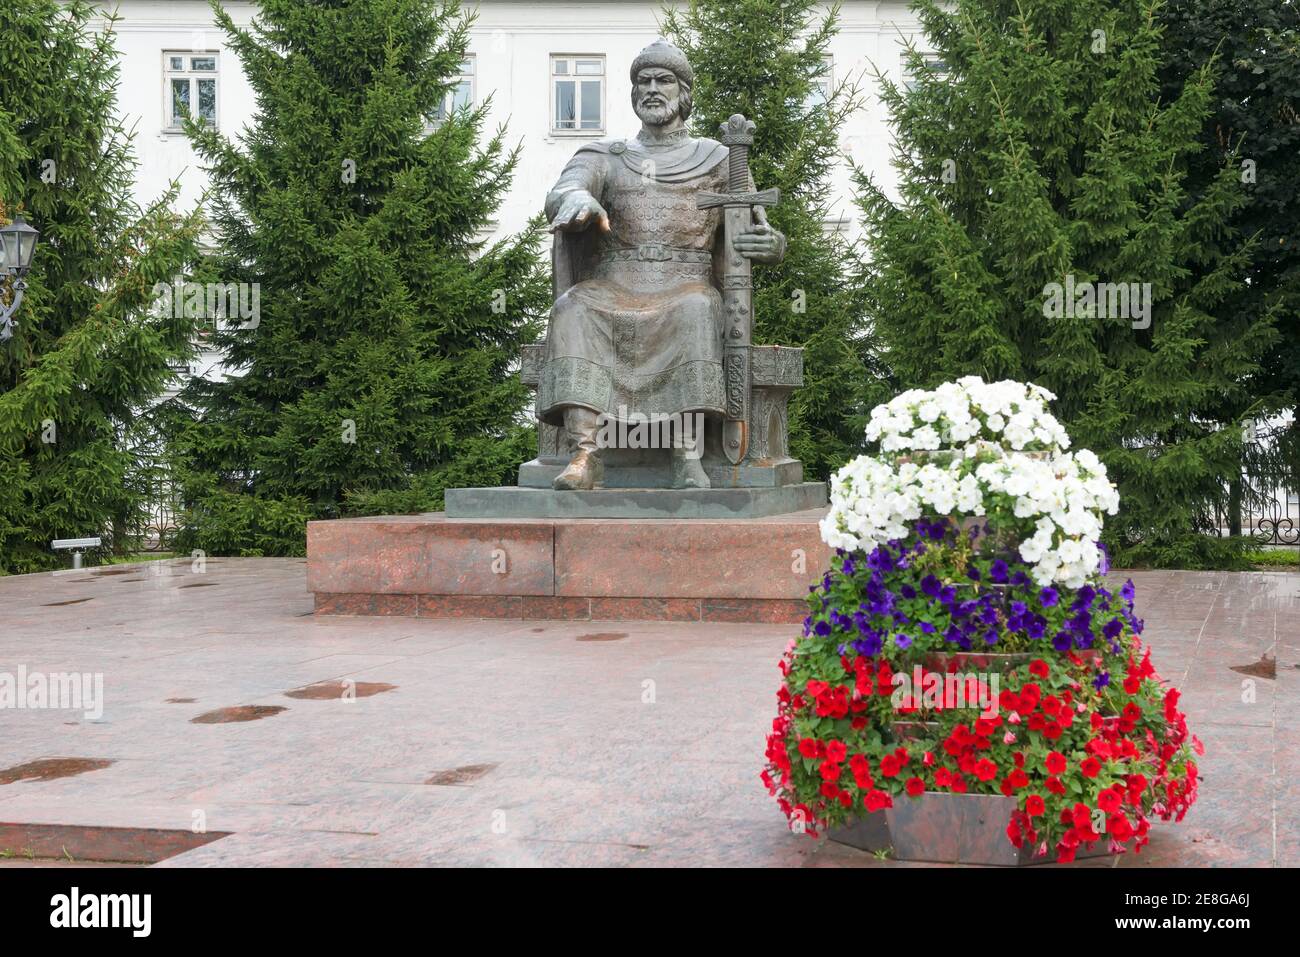 Kostroma, Russia - August 11, 2020: Monument to the founder of Kostroma - Prince Yuri Dolgoruky. Golden ring of Russia Stock Photo